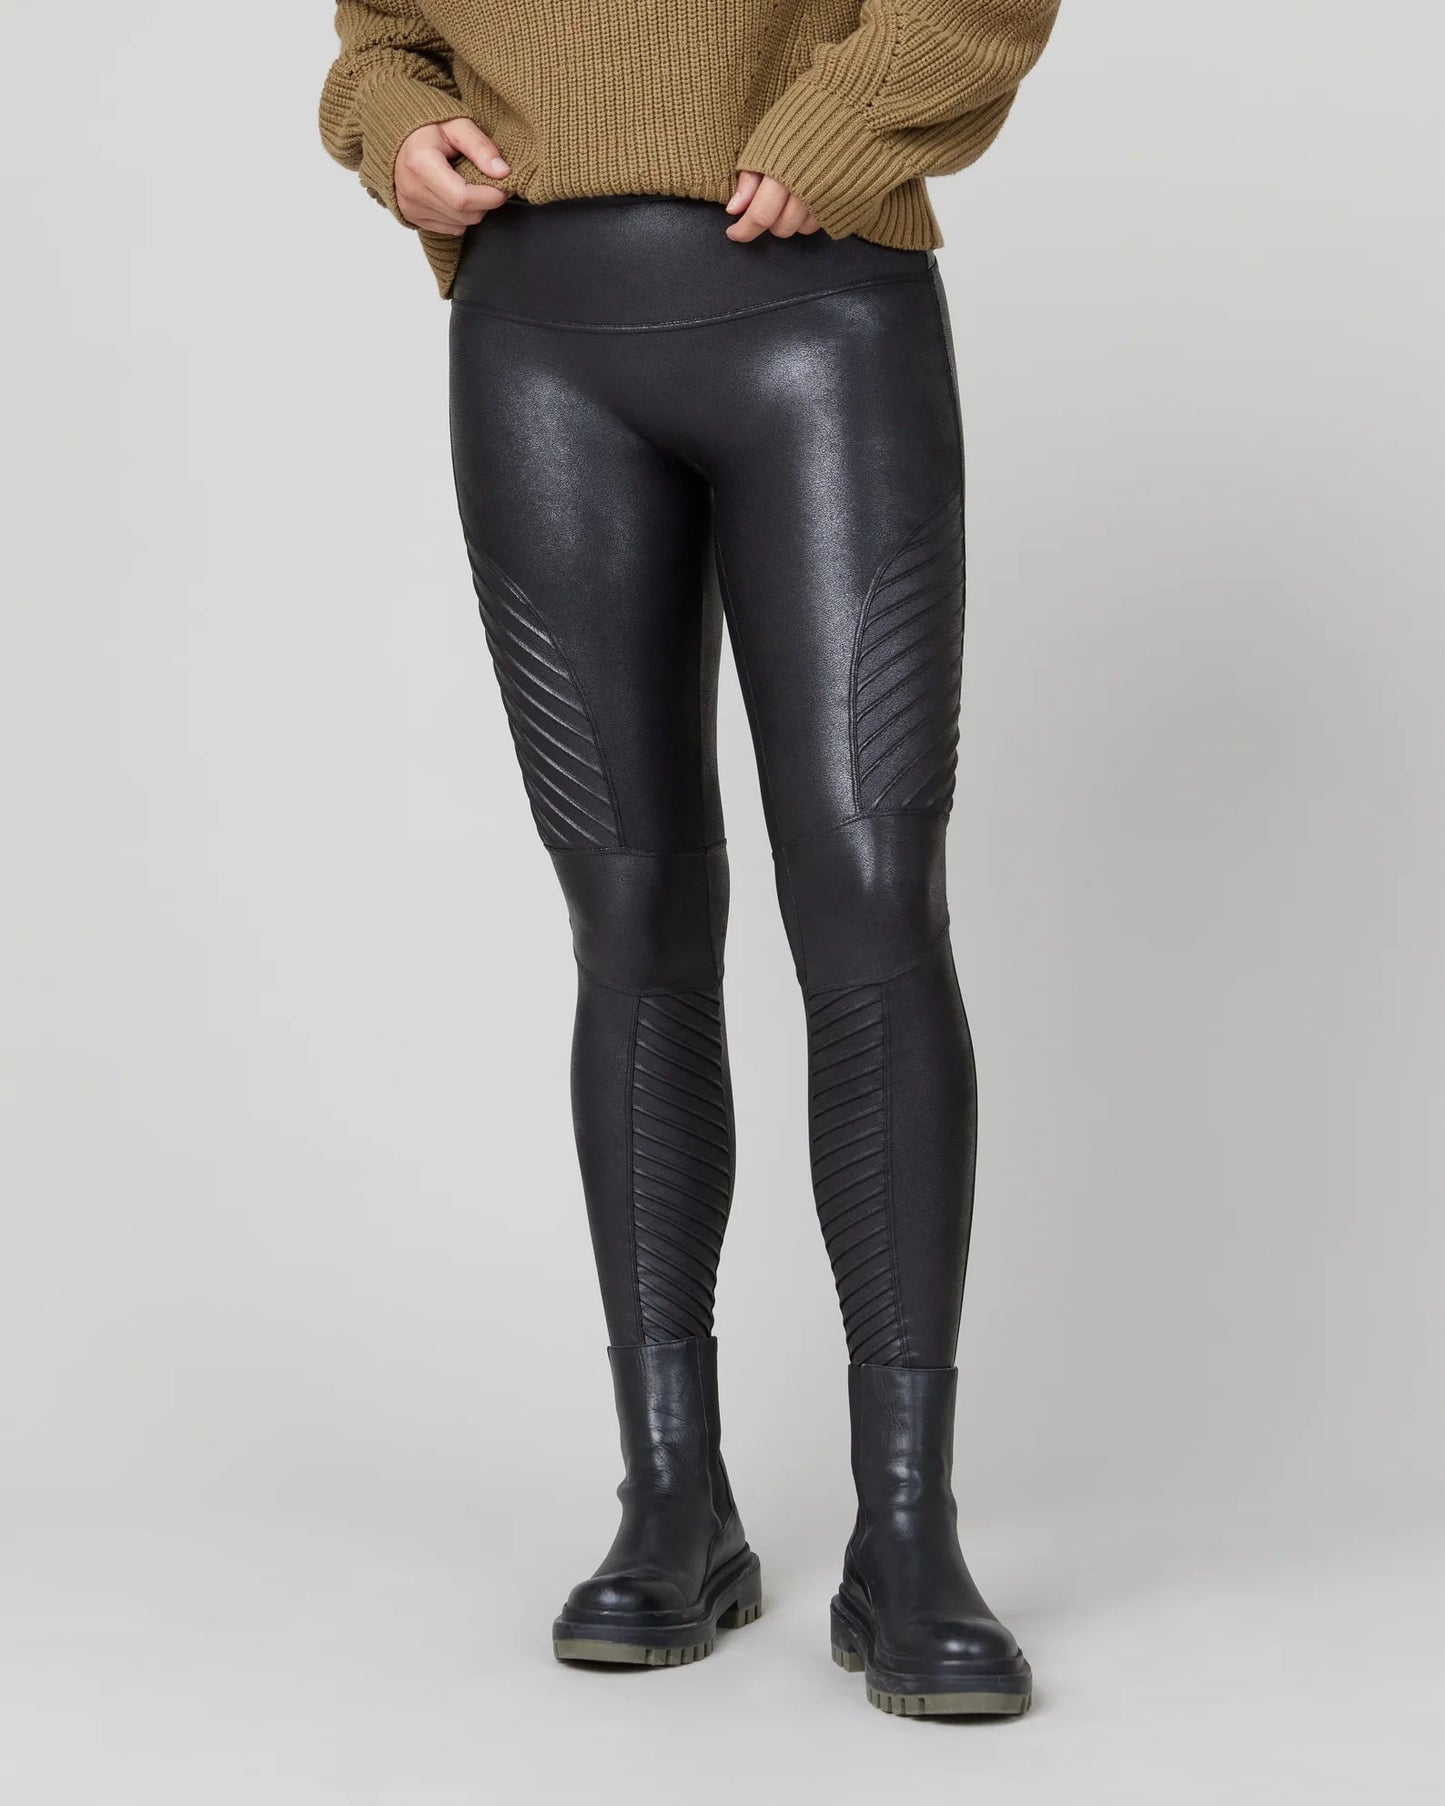 Spanx Faux Leather Moto Leggings – Research and Design